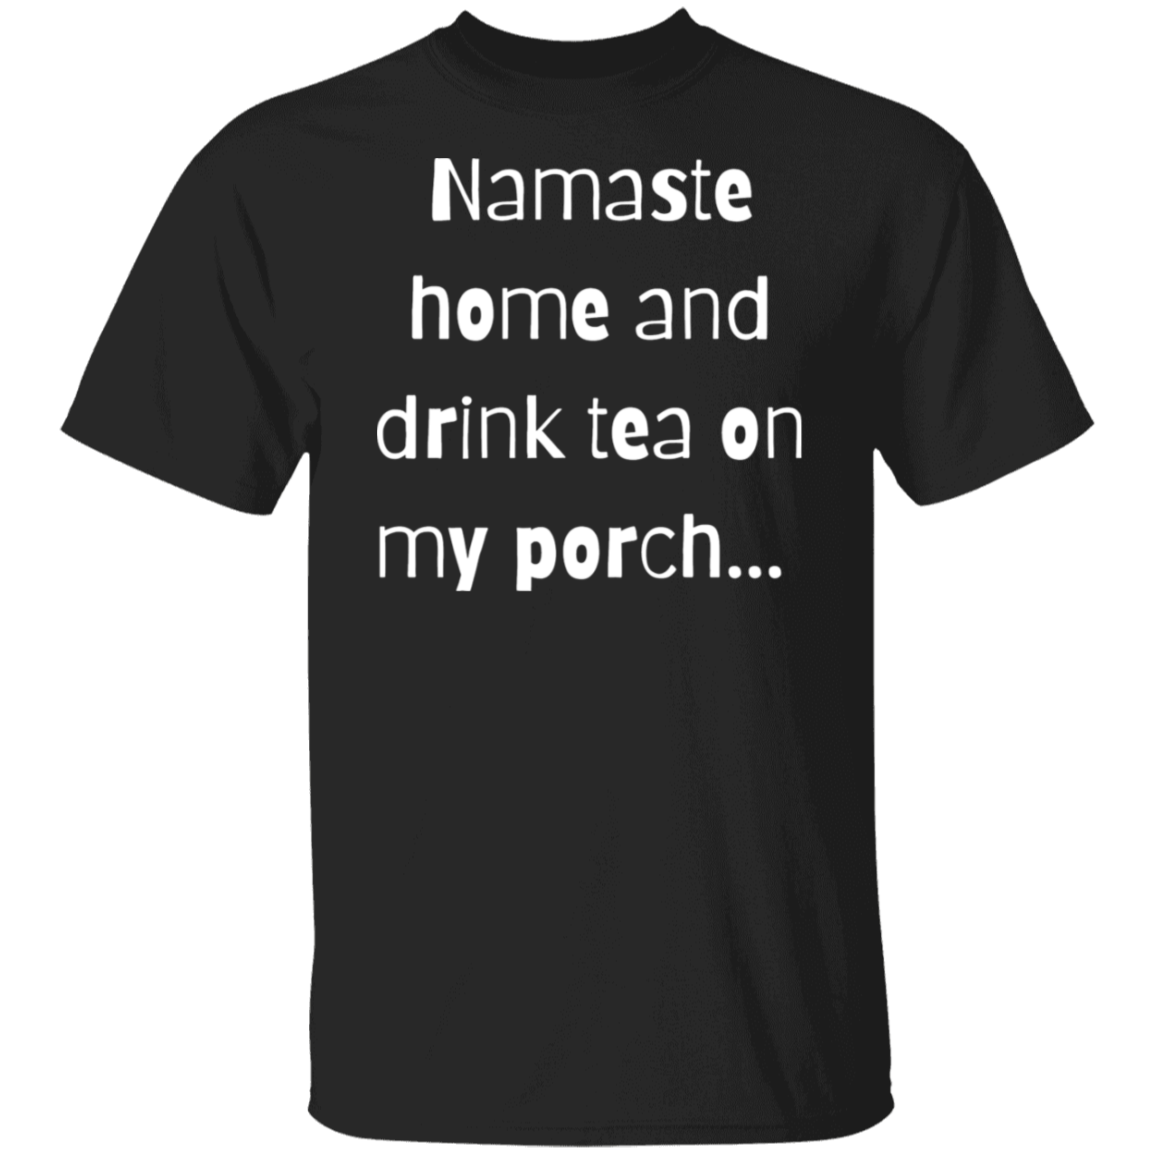 Namaste home and drink tea on my porch T-Shirt